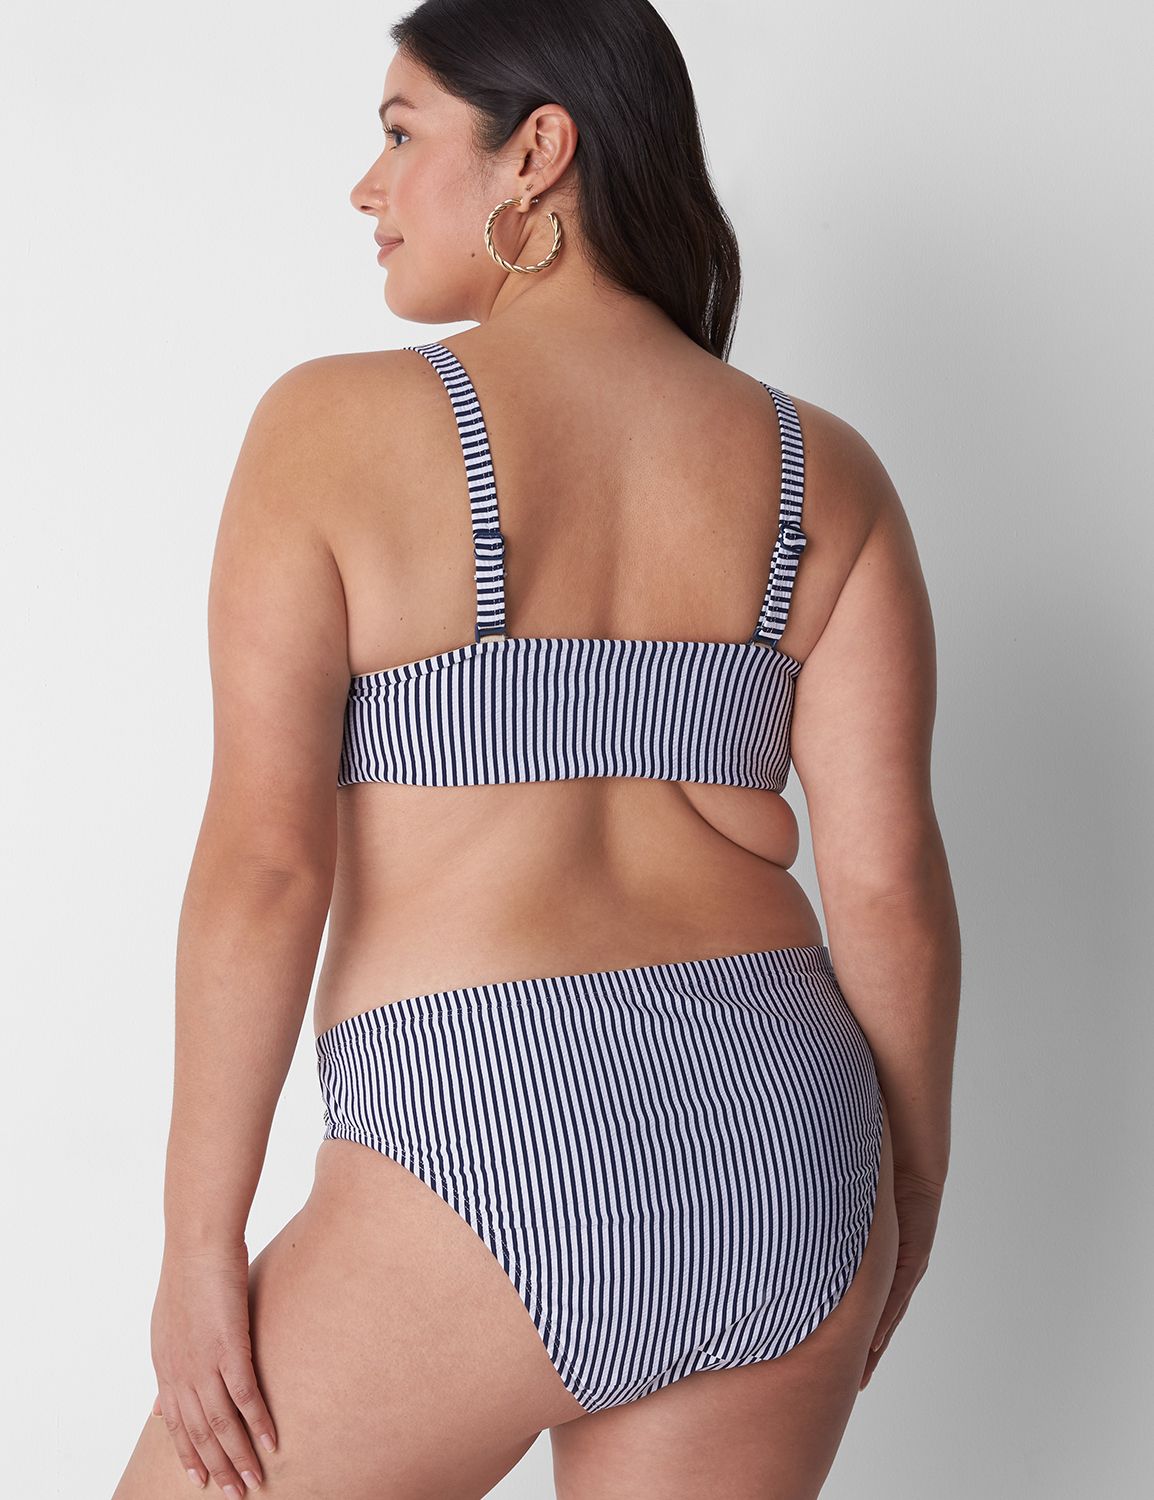 Swim By Cacique Swimwear Top And Bottom For Sale In Salt, 54% OFF